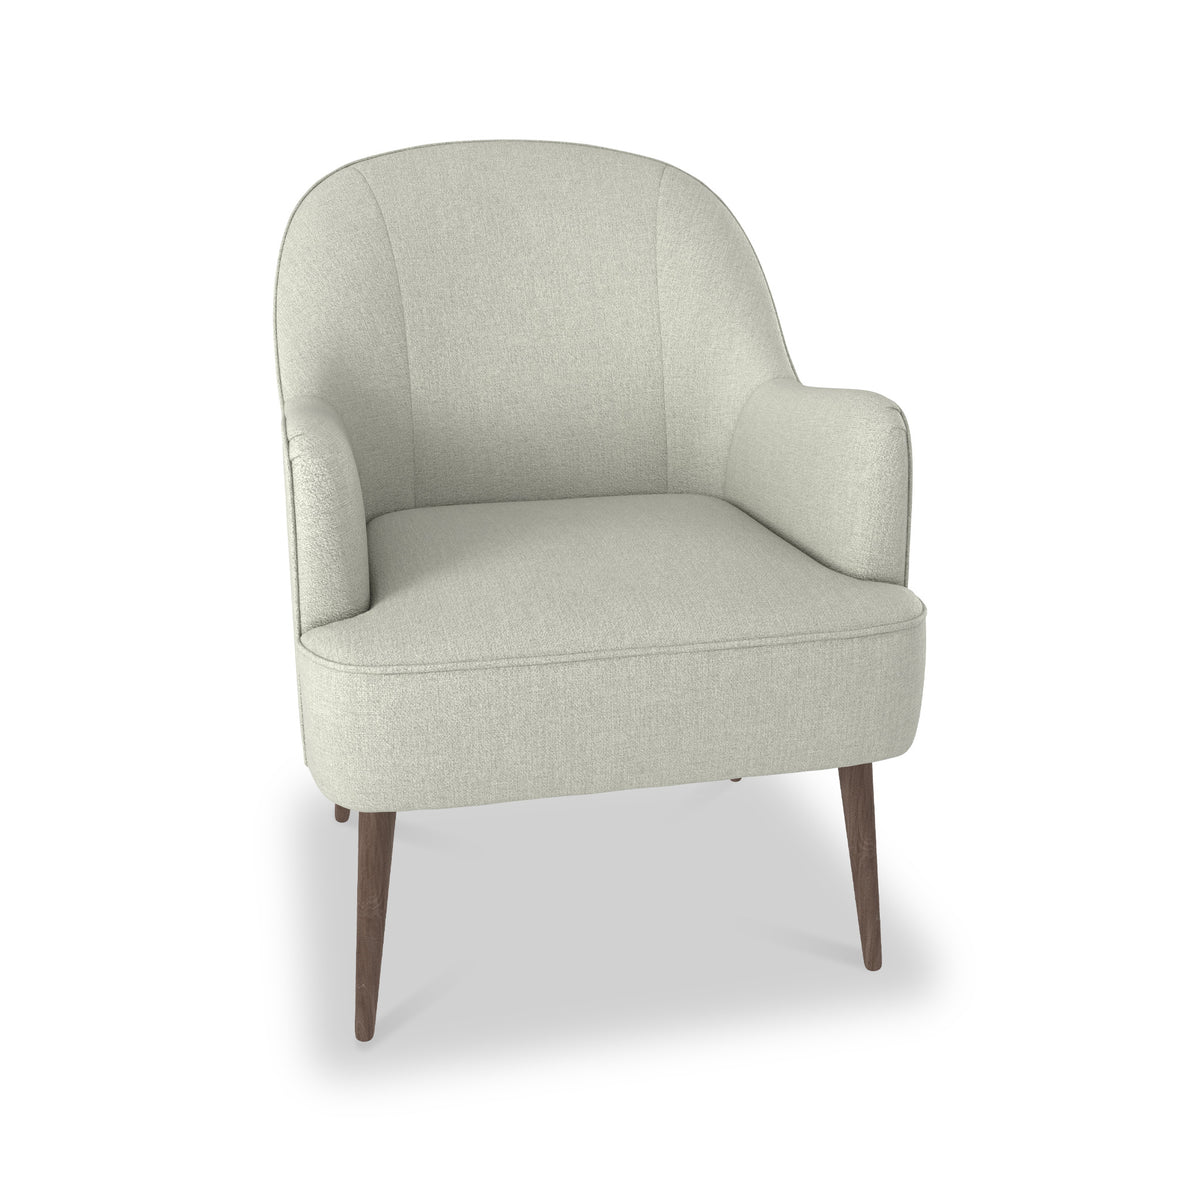 Todd Silk Accent Chair for Living Room or Bedroom from Roseland